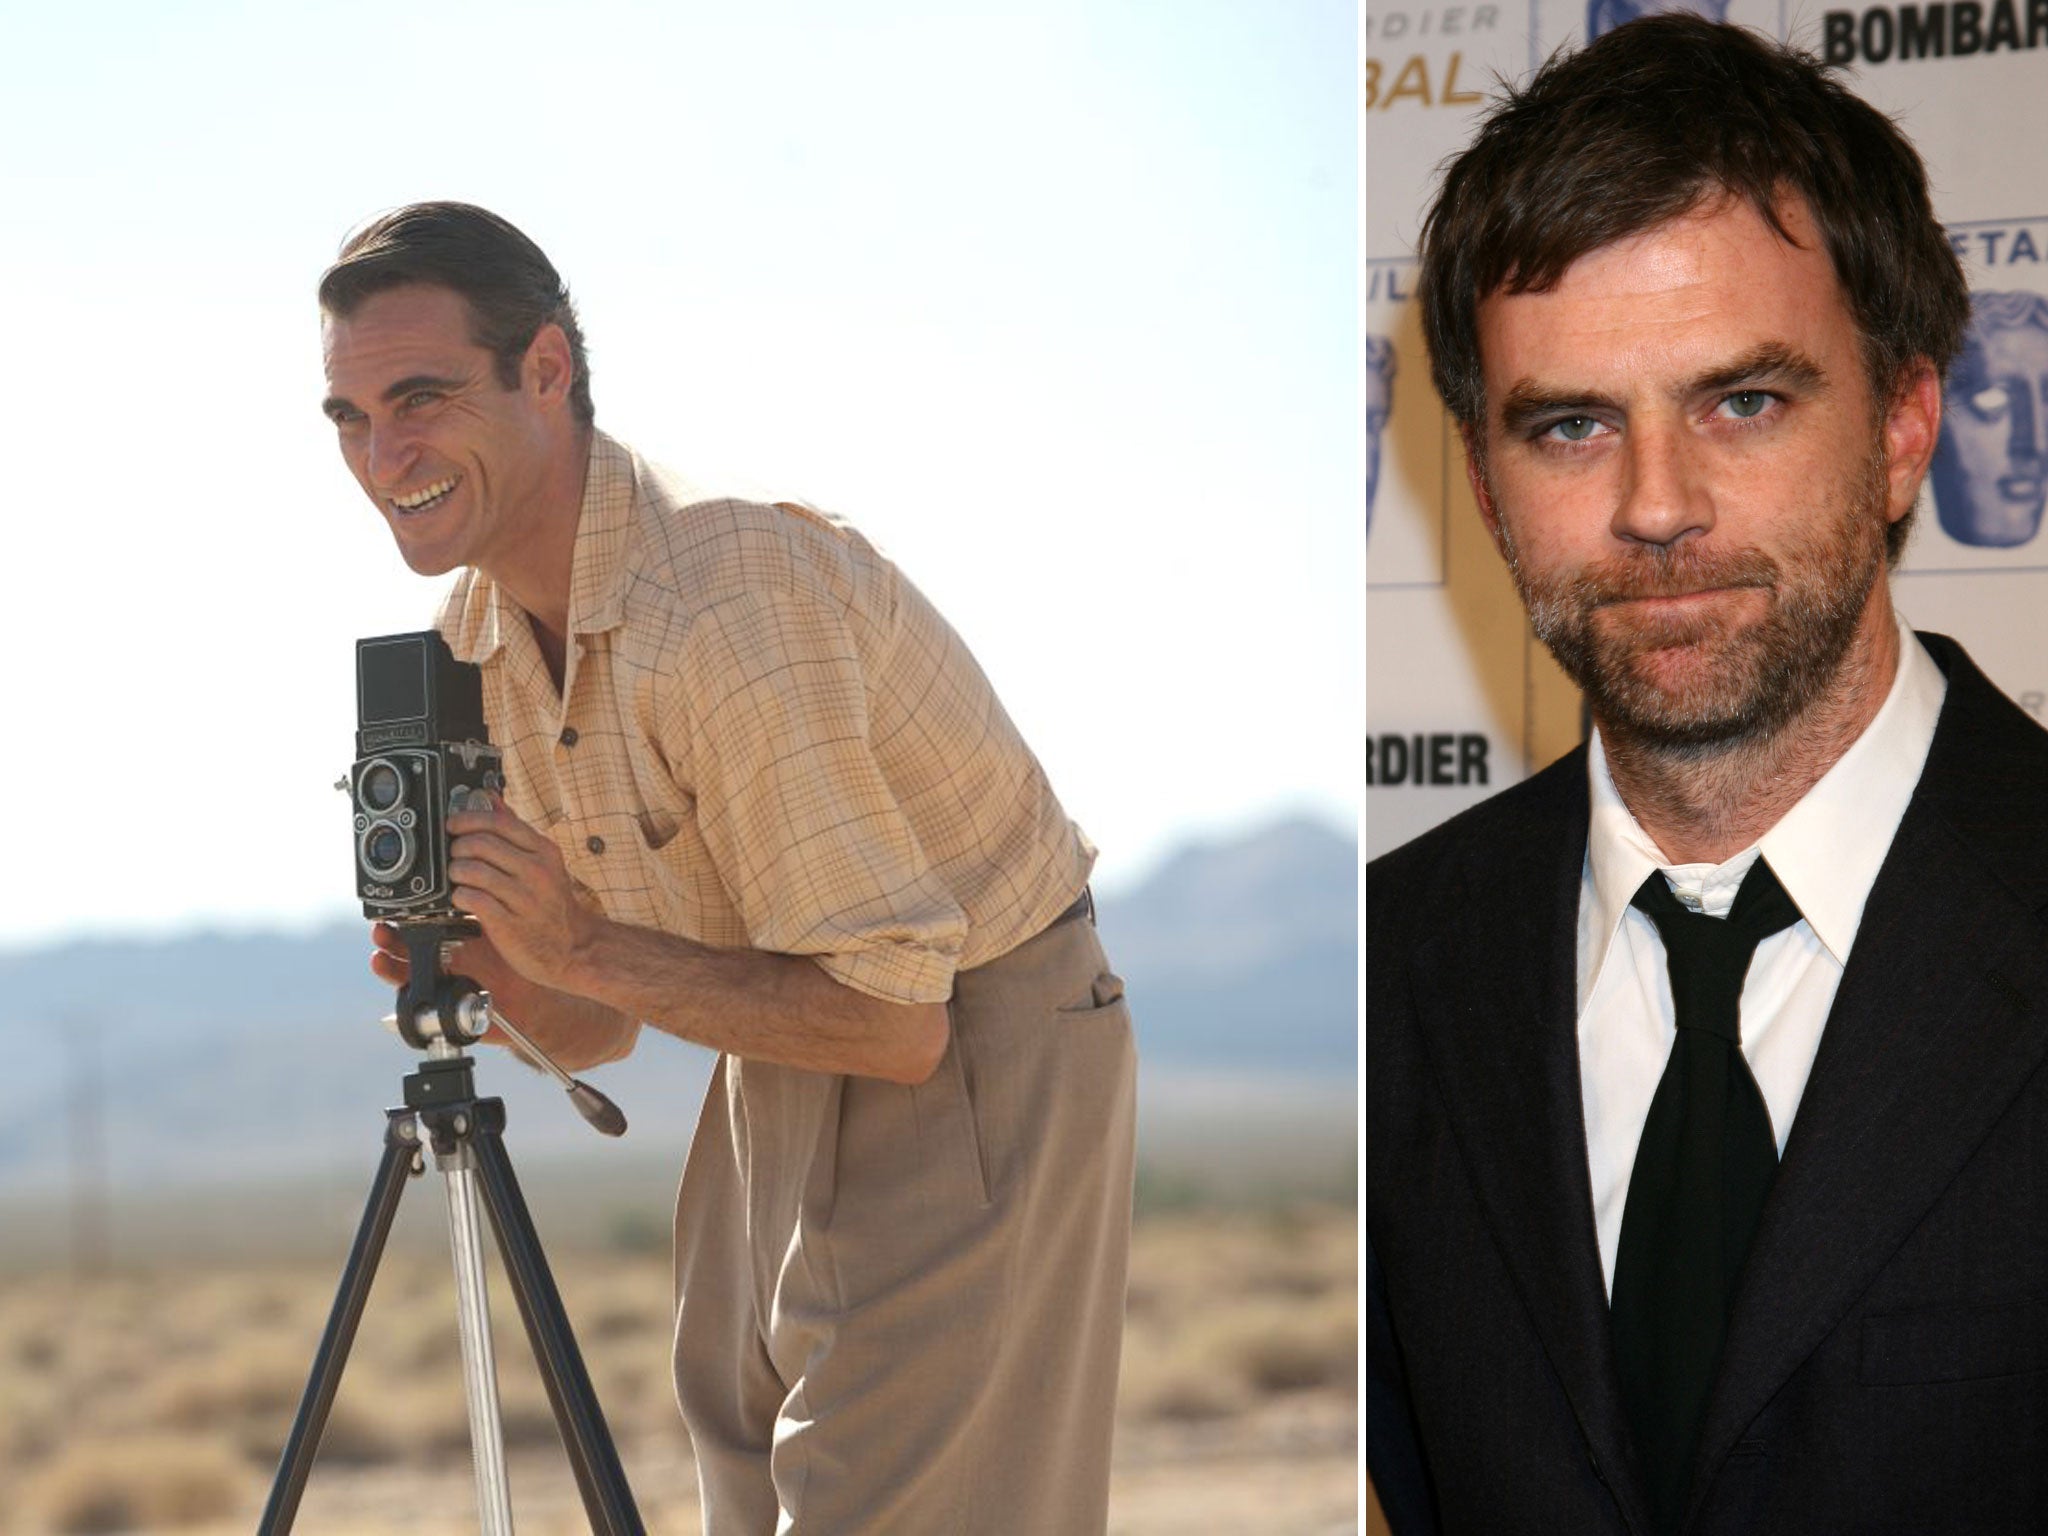 Director Paul Thomas Anderson (right) and his movie The Master featuring Joaquin Phoenix